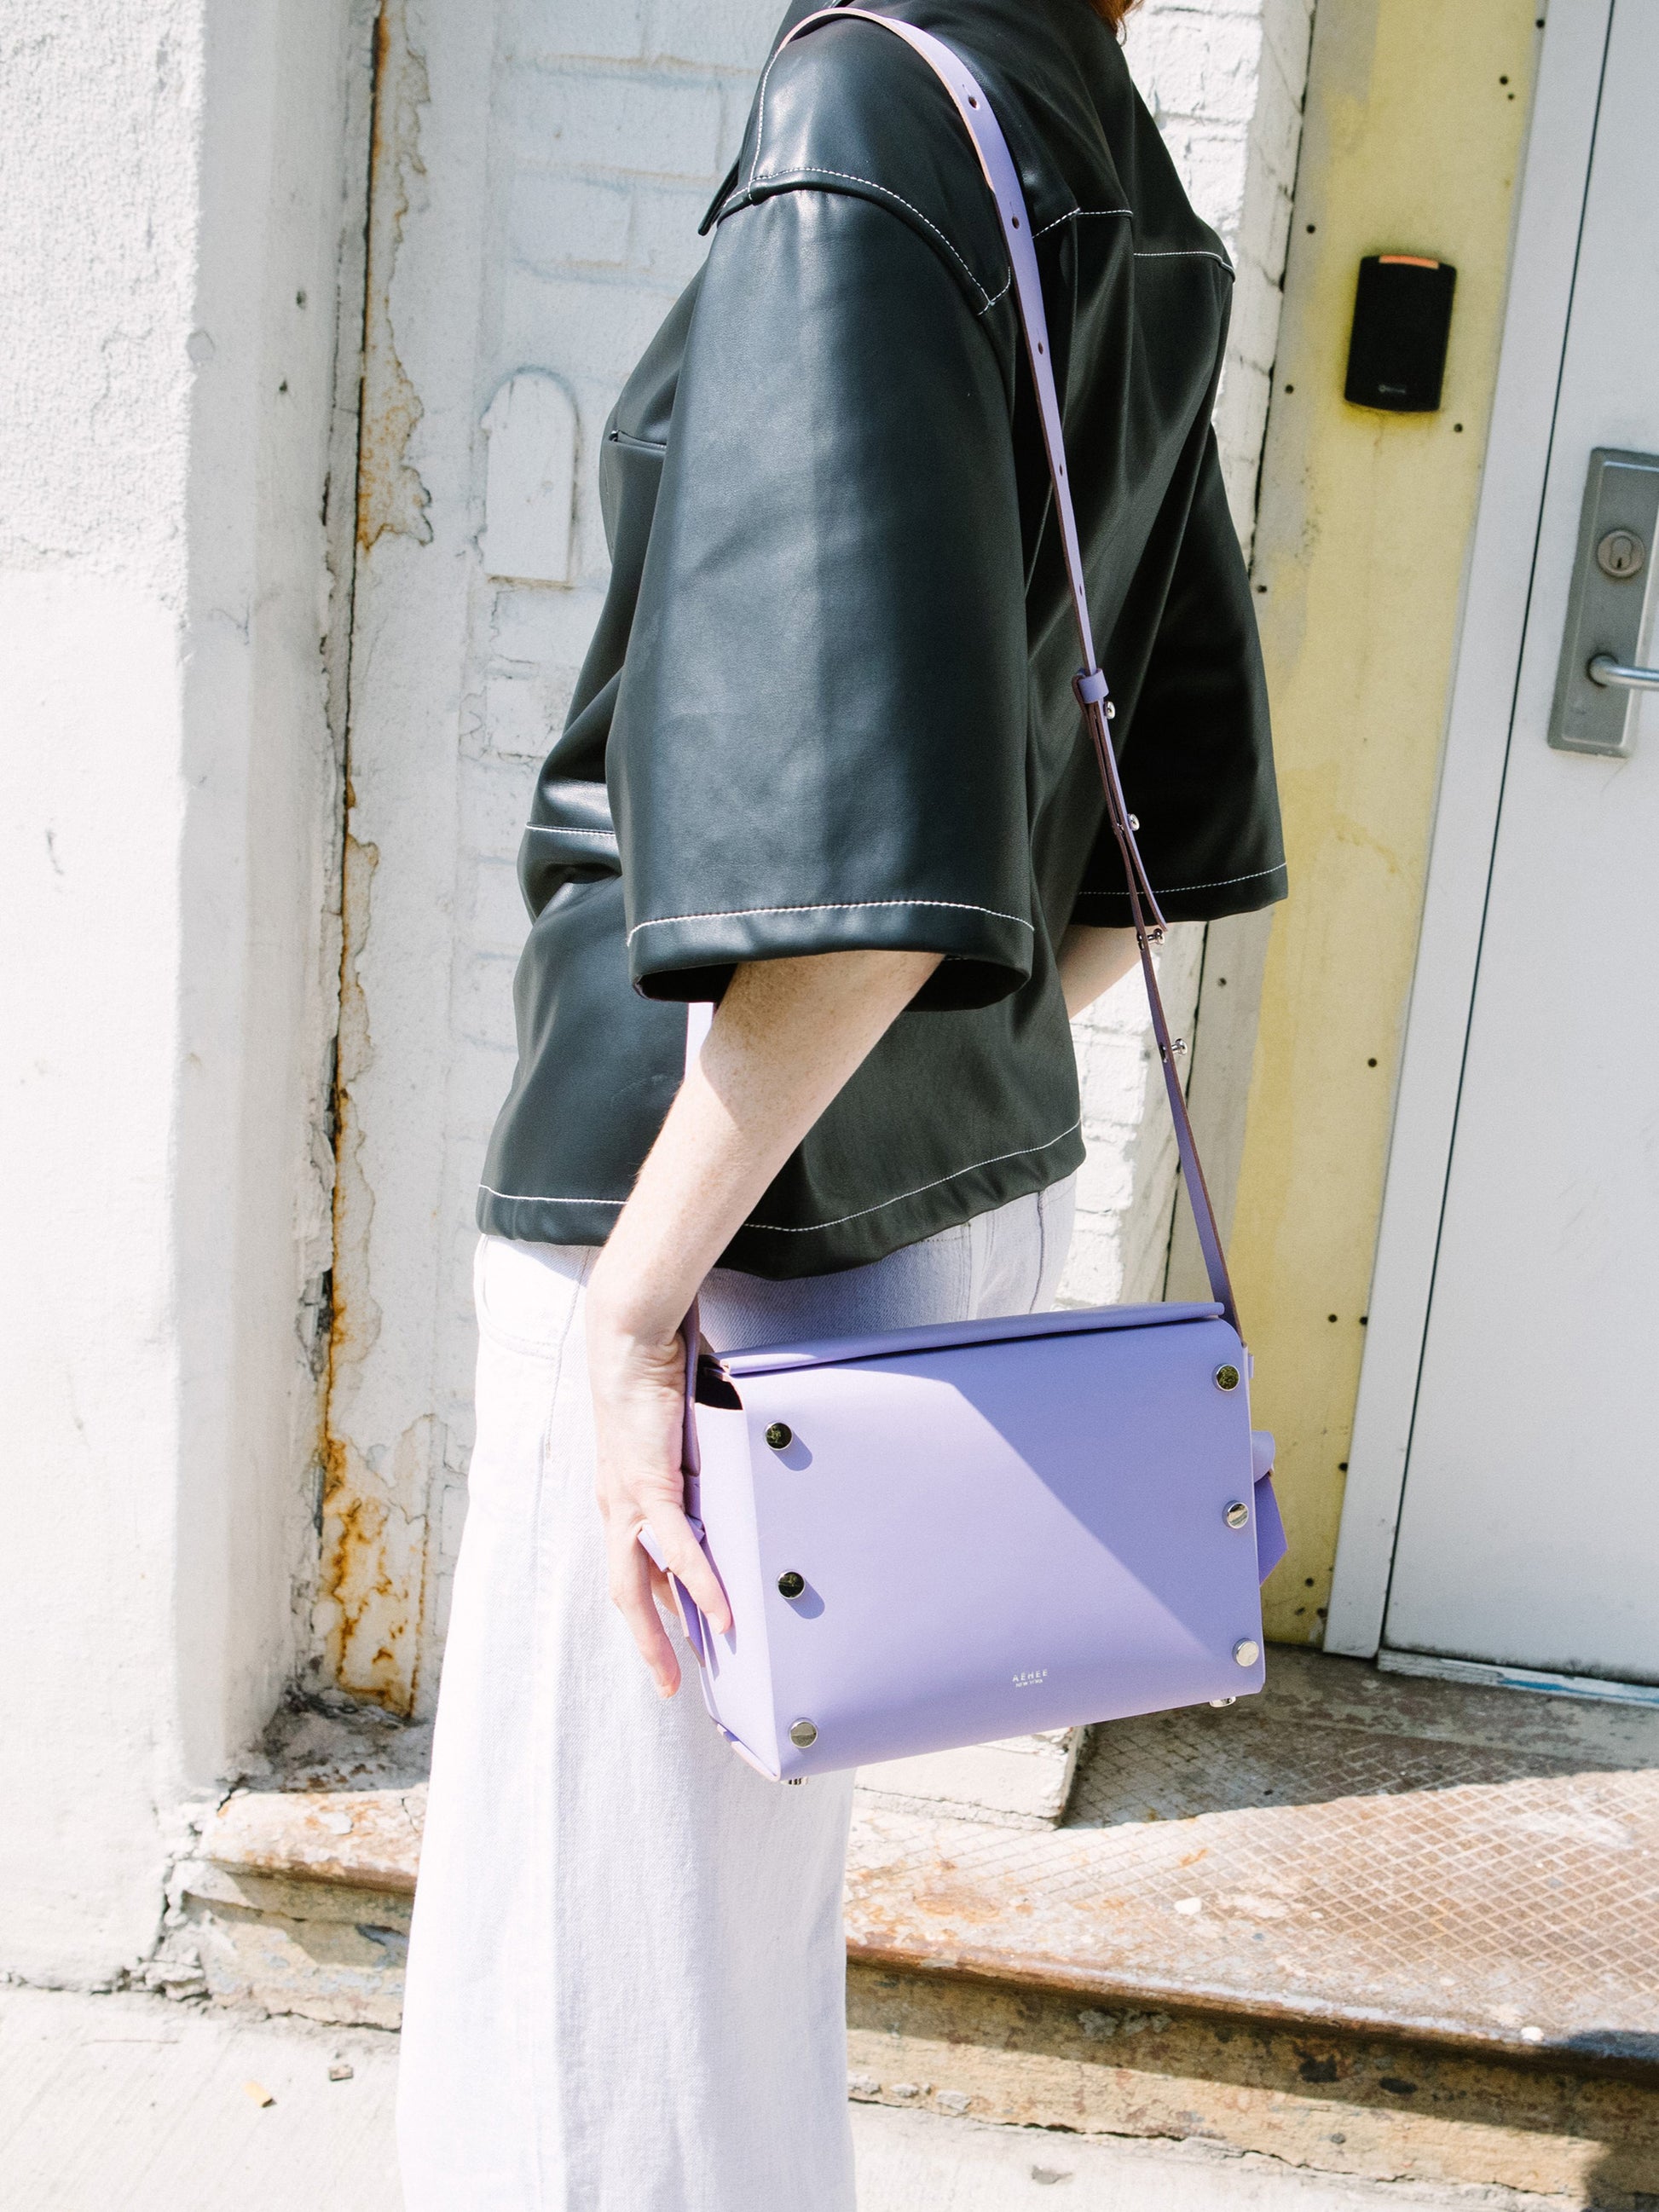 Chic lavender crossbody bag and shoulder bag with adjustable strap crafted from Italian vegetable tanned leather for a minimal yet sophisticated look.